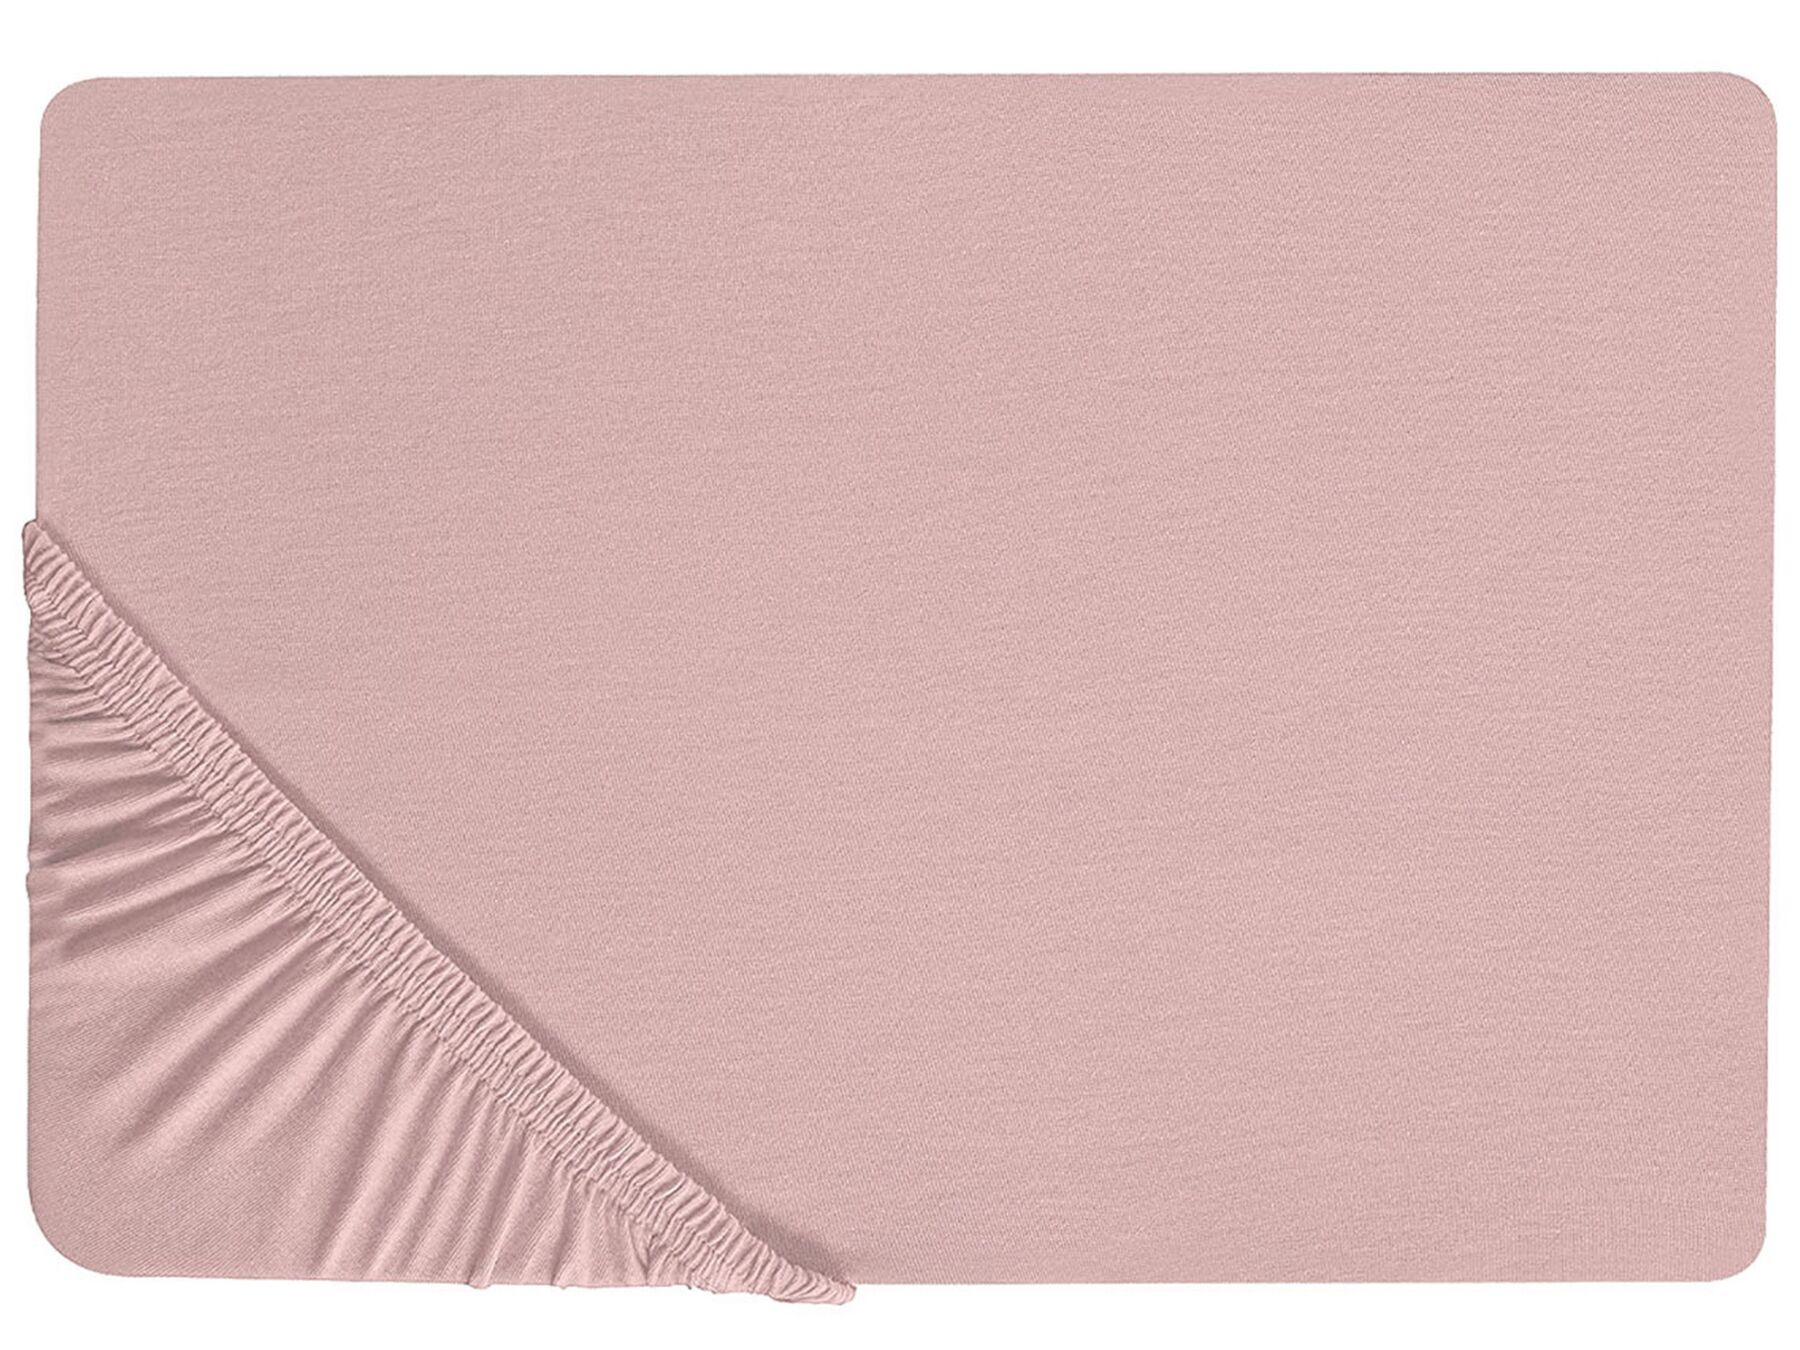 Cotton Fitted Sheet 200 x 200 cm Pink HOFUF_815940